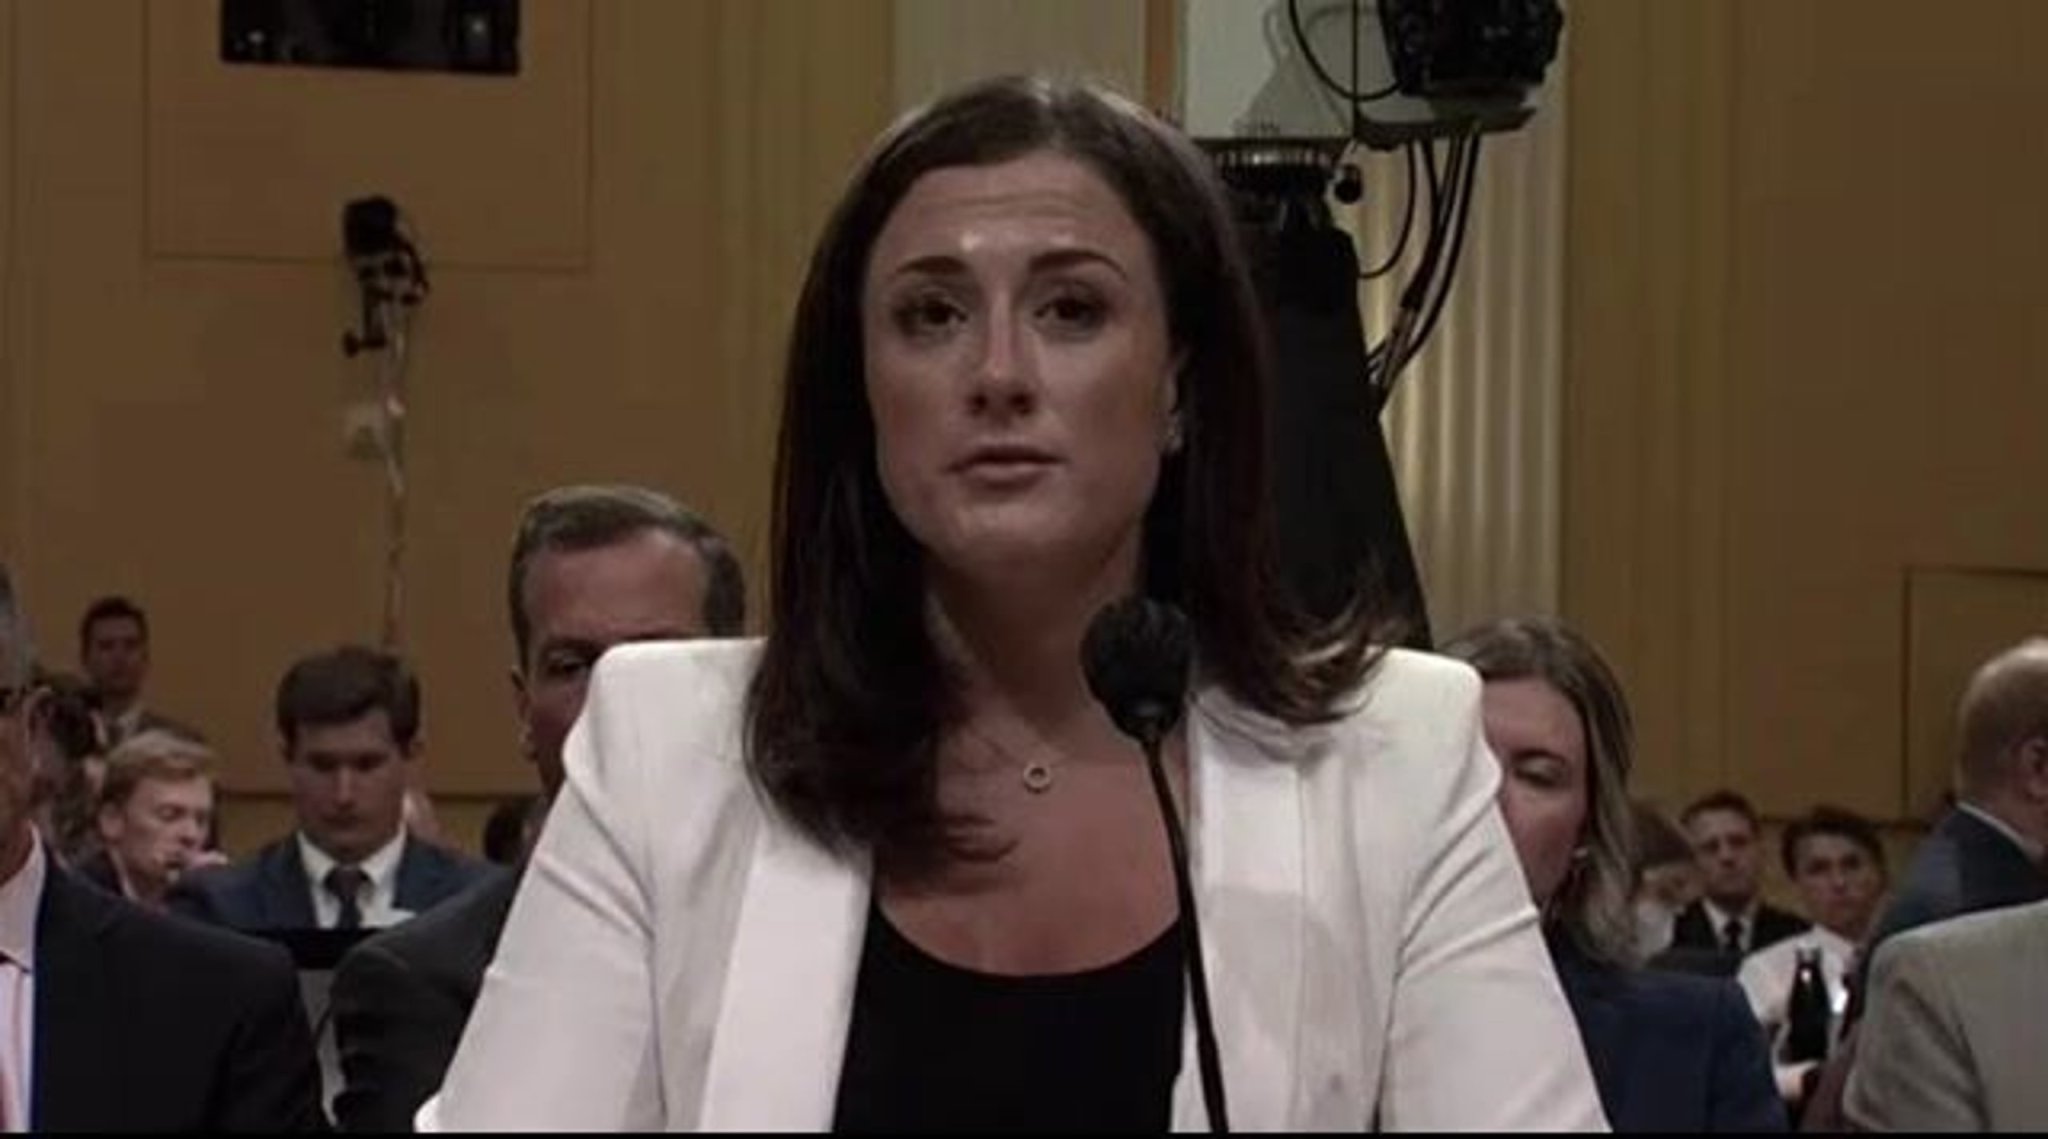 Meadows aide Cassidy Hutchinson testifies that she heard Donald Trump wanted to go to the Capitol.